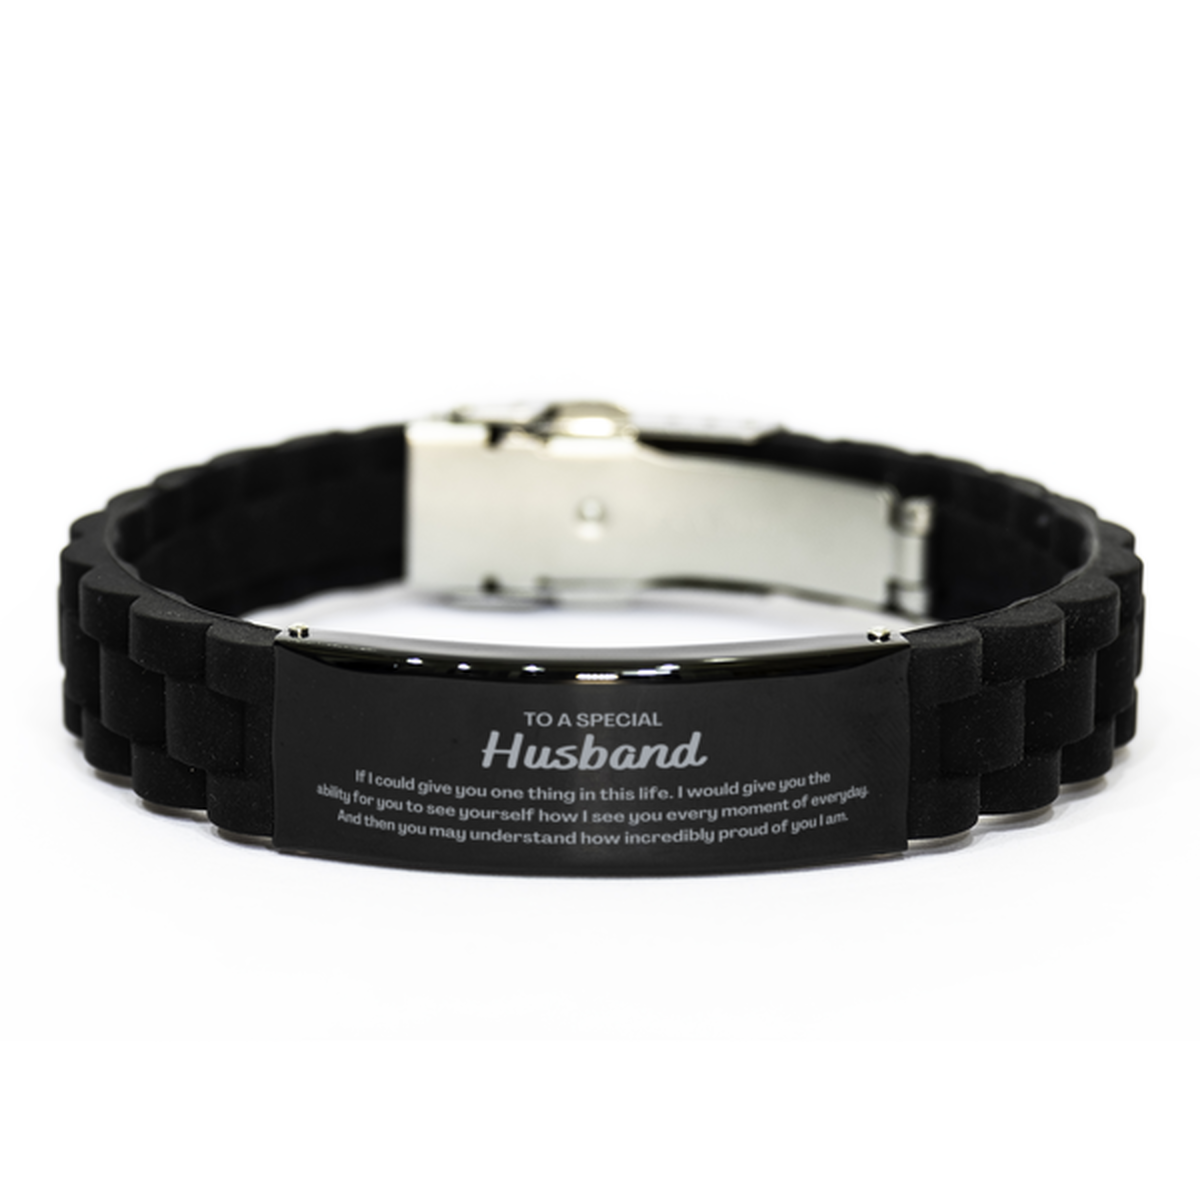 To My Husband Black Glidelock Clasp Bracelet, Gifts For Husband Engraved, Inspirational Gifts for Christmas Birthday, Epic Gifts for Husband To A Special Husband how incredibly proud of you I am